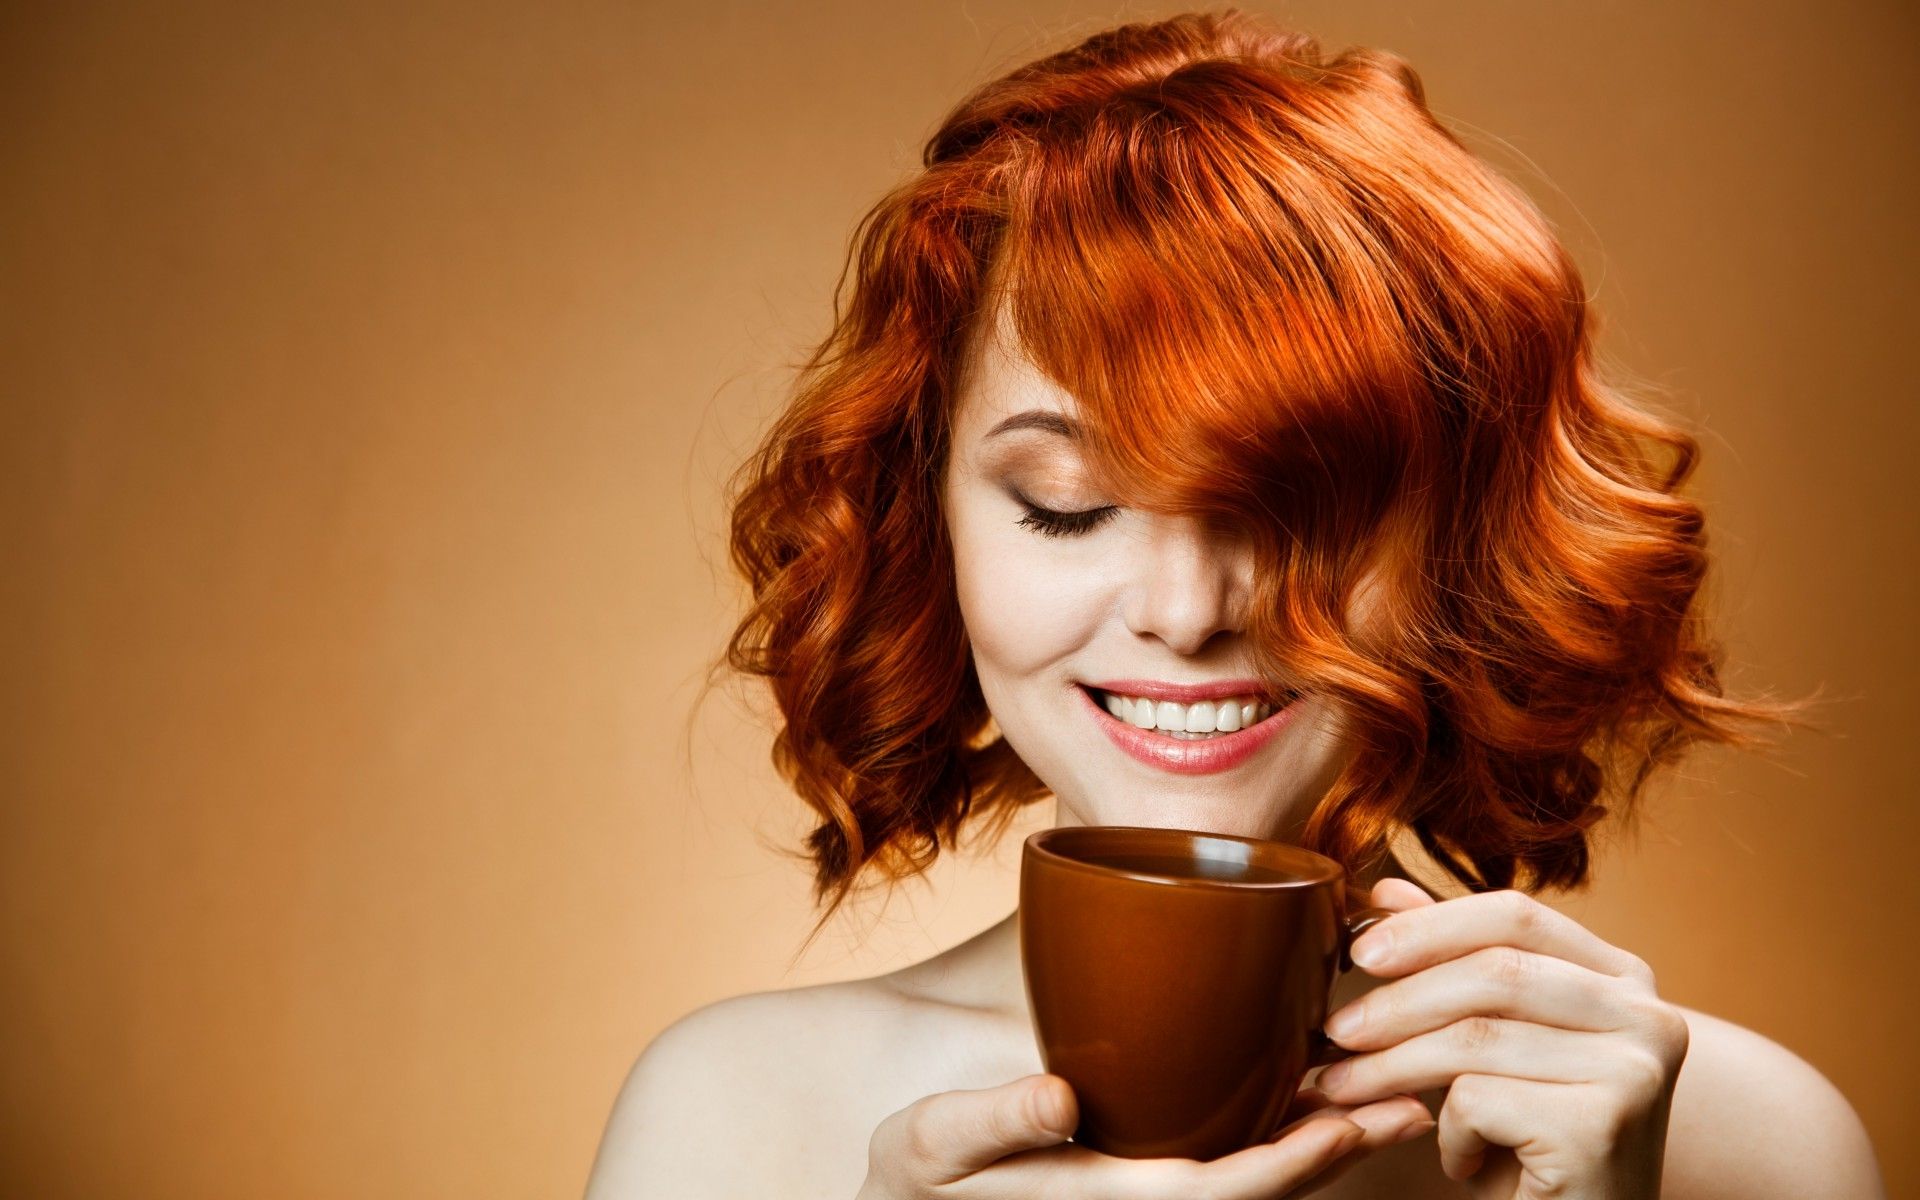 Smile Redhead Girl Drink Coffee Wallpaper HD / Desktop and Mobile Background